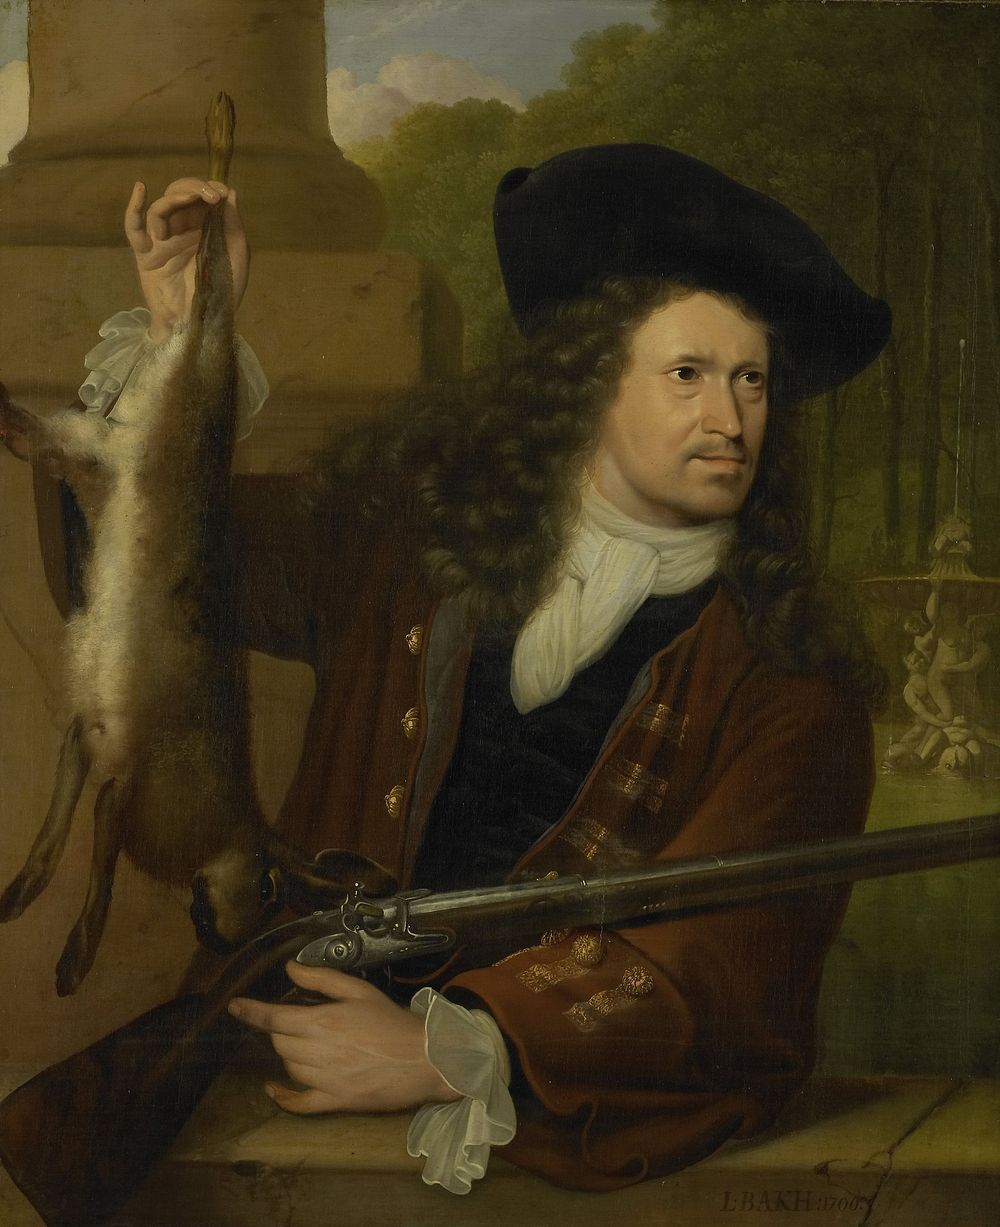 Jan de Hooghe (1650-1731). Anna de Hooghe's Cousin, Dressed for Shooting (1700) by Ludolf Bakhuysen